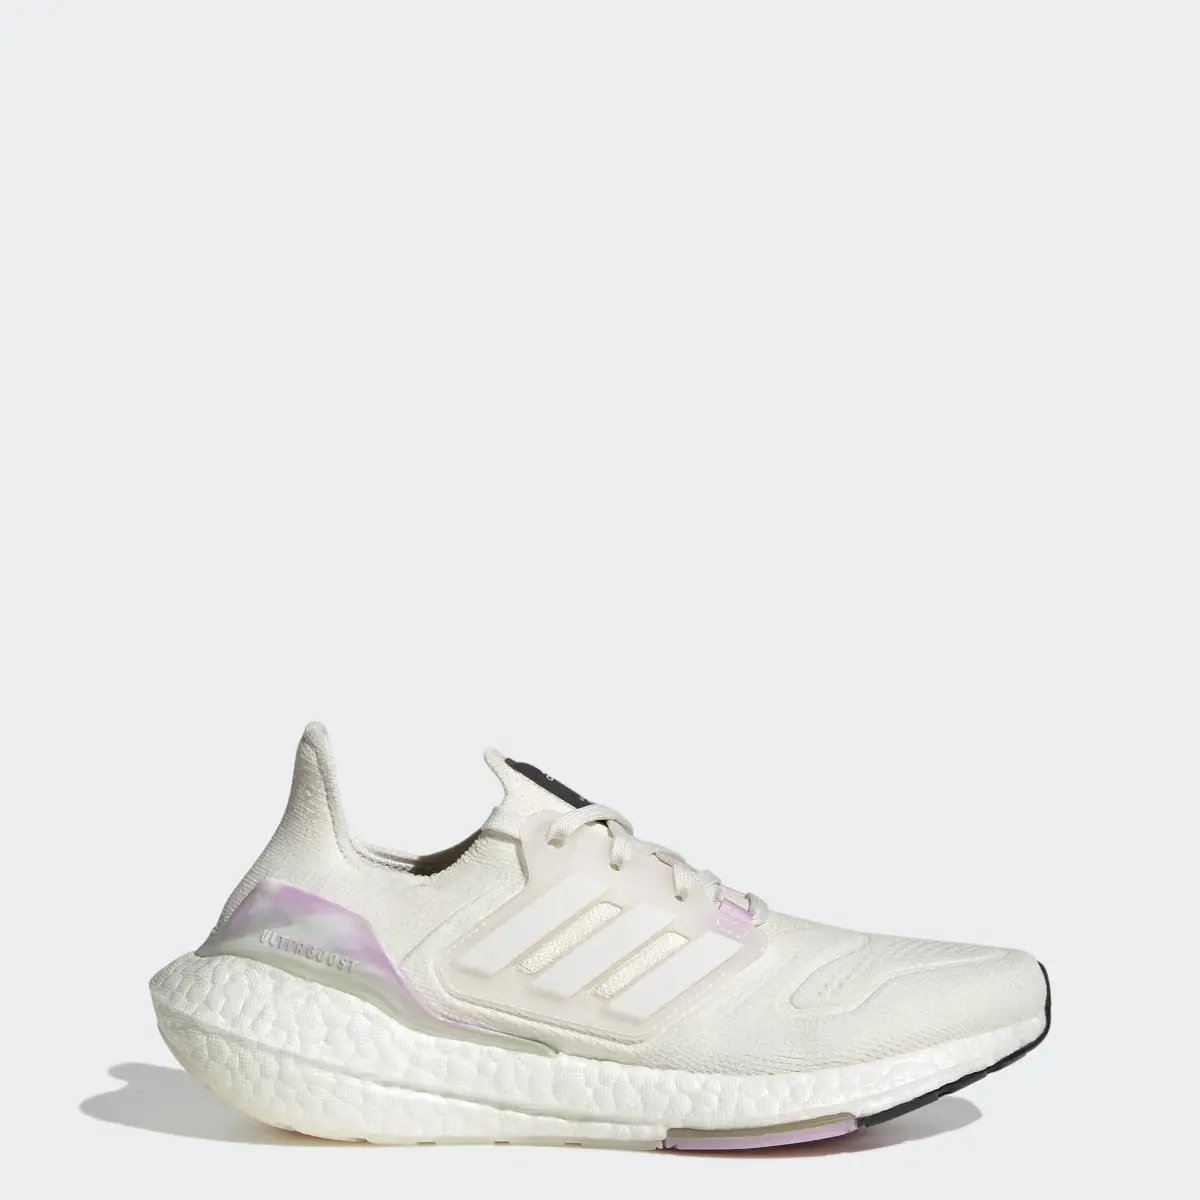 Adidas Ultraboost 22 Made With Nature Shoes. 1